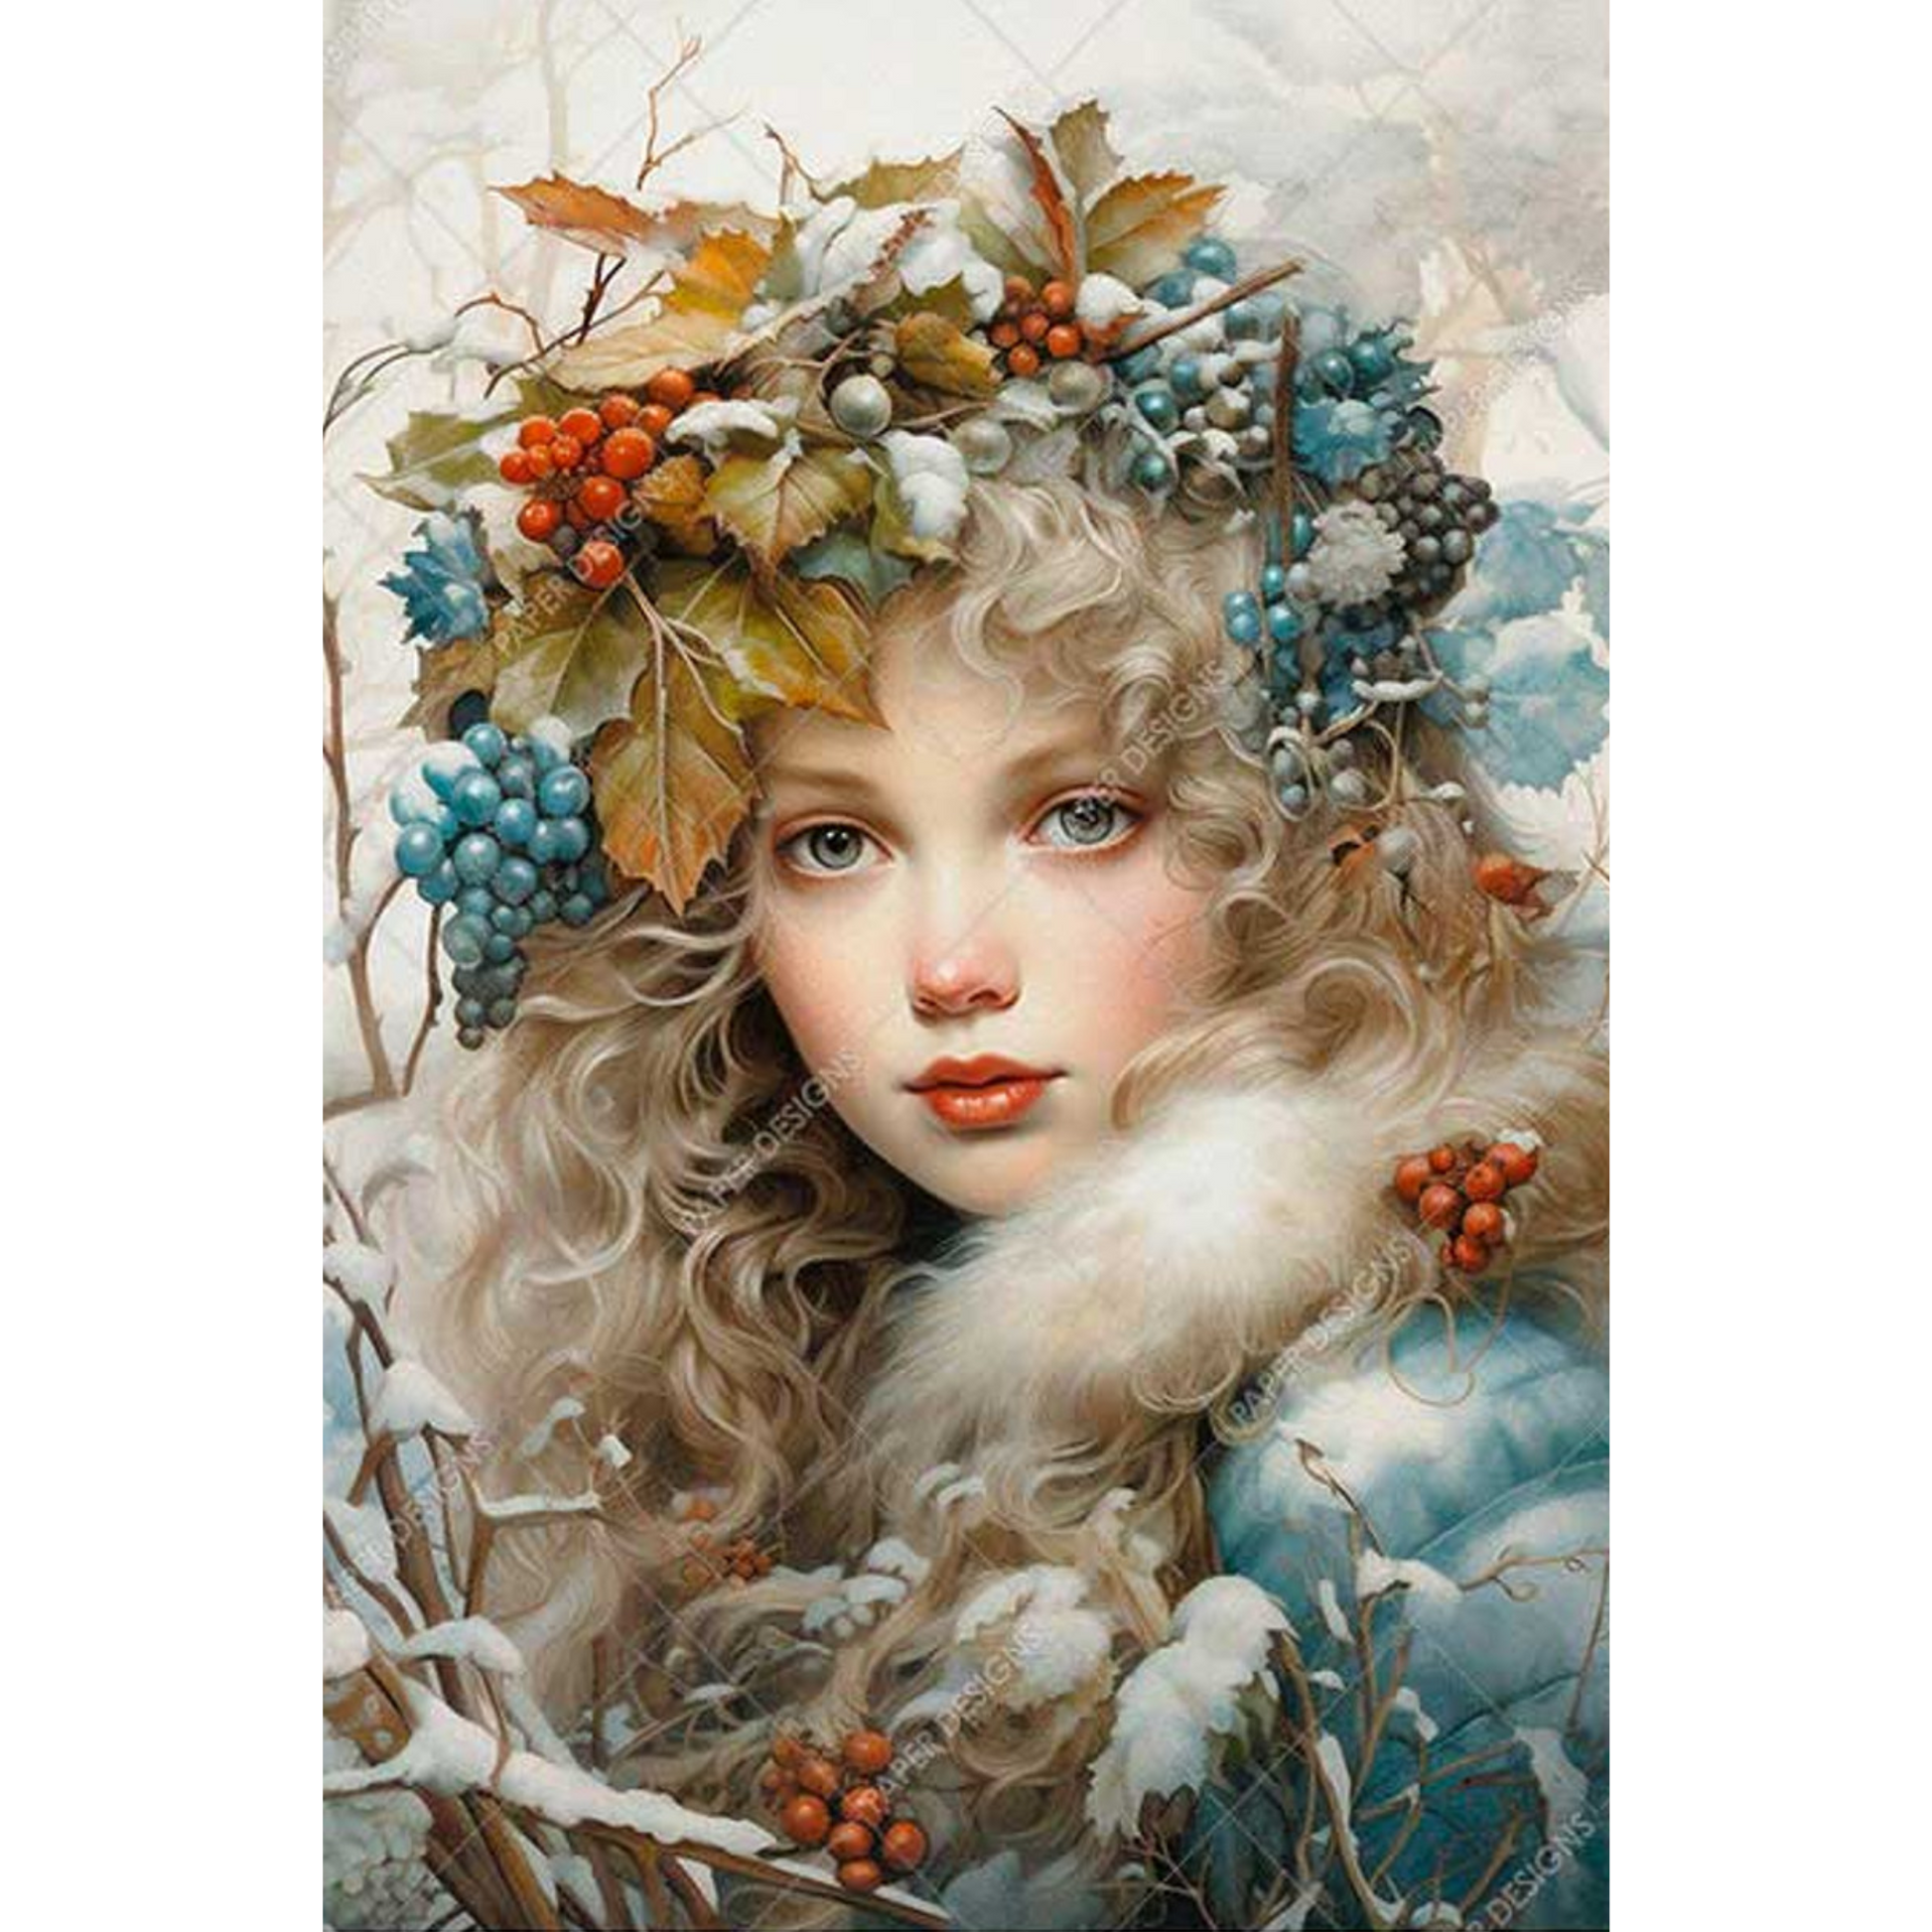 "Winter Maiden With Berry Crown" decoupage rice paper by Paper Designs. Available at Milton's Daughter.